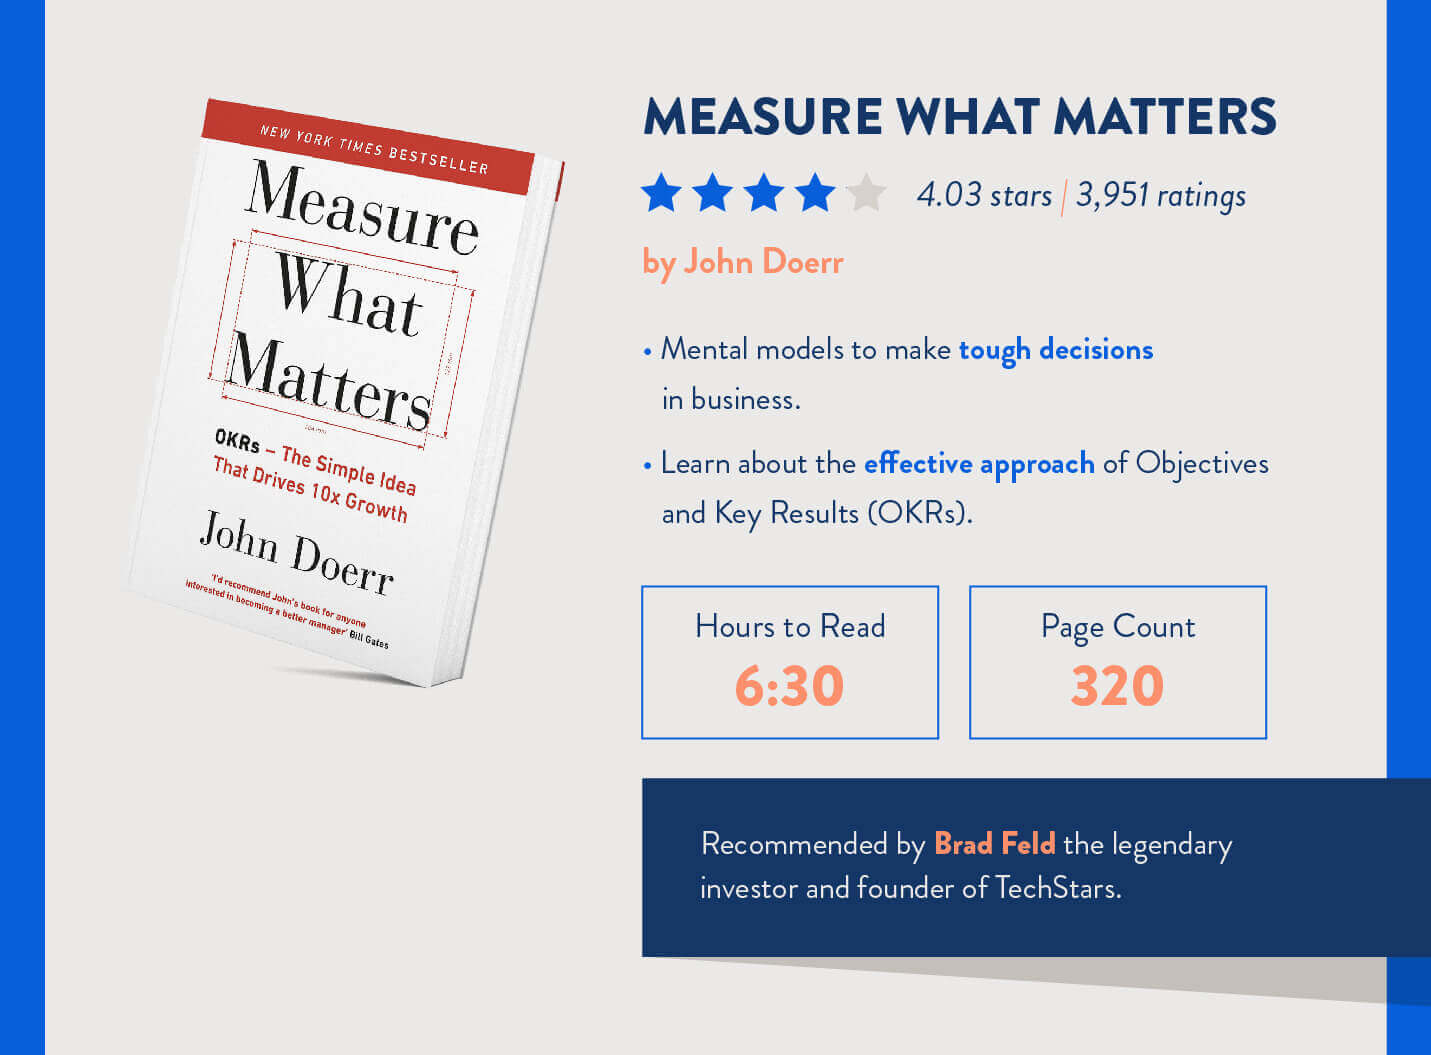 Measure what matters marketing book by john doerr about OKR and recommended by investor brad feld